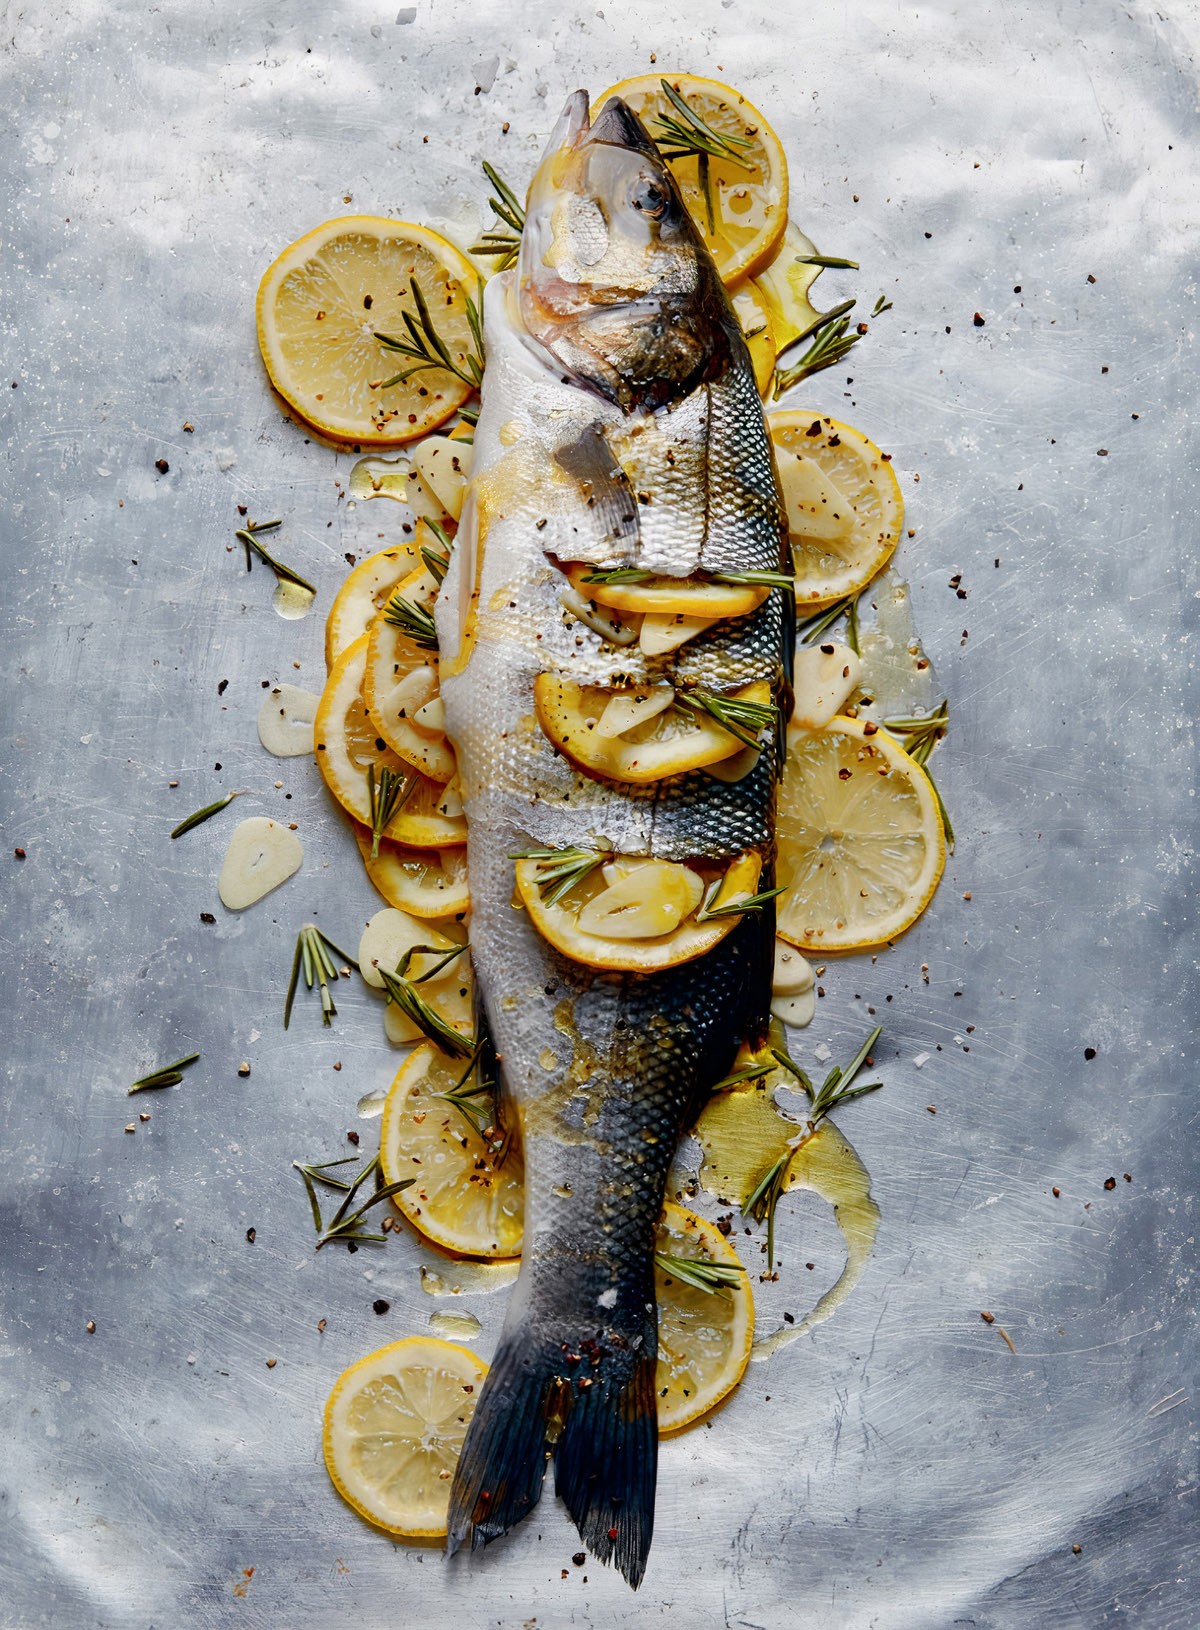 Roasted sea bass with rosemary, lemon and garlic from Solo by Signe ...